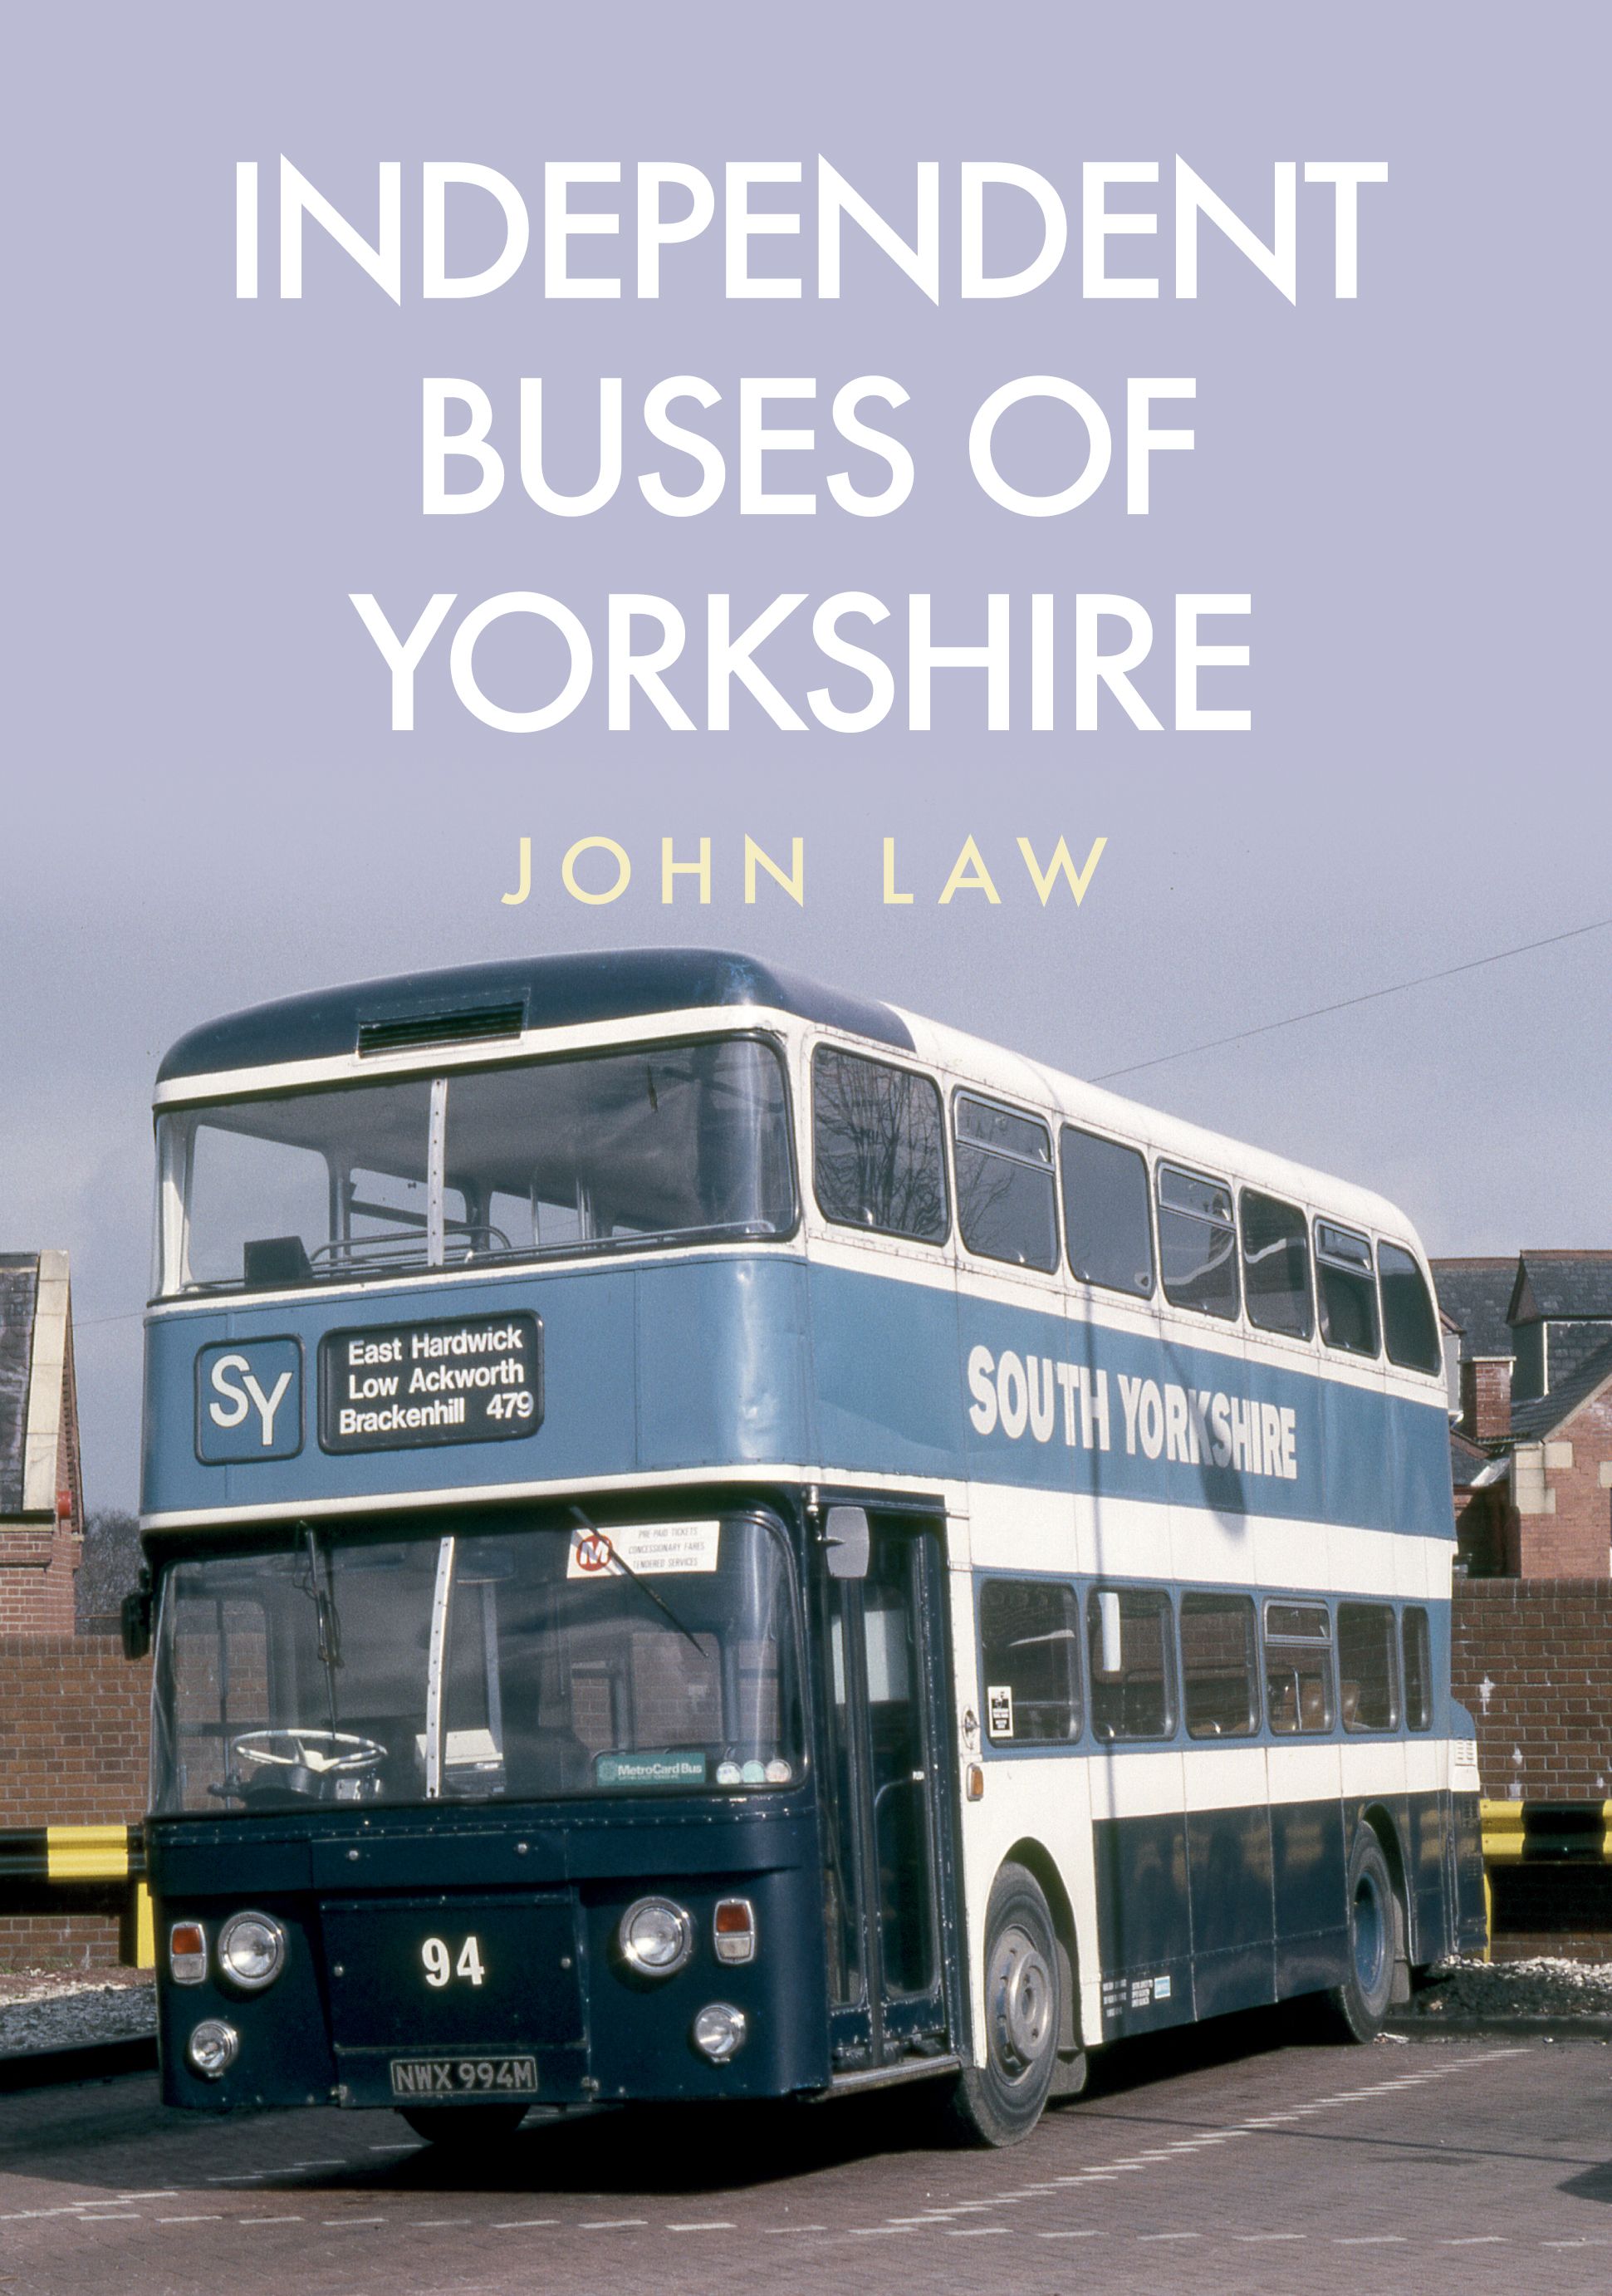 Independent Buses of Yorkshire by John Law - Chester Model Centre